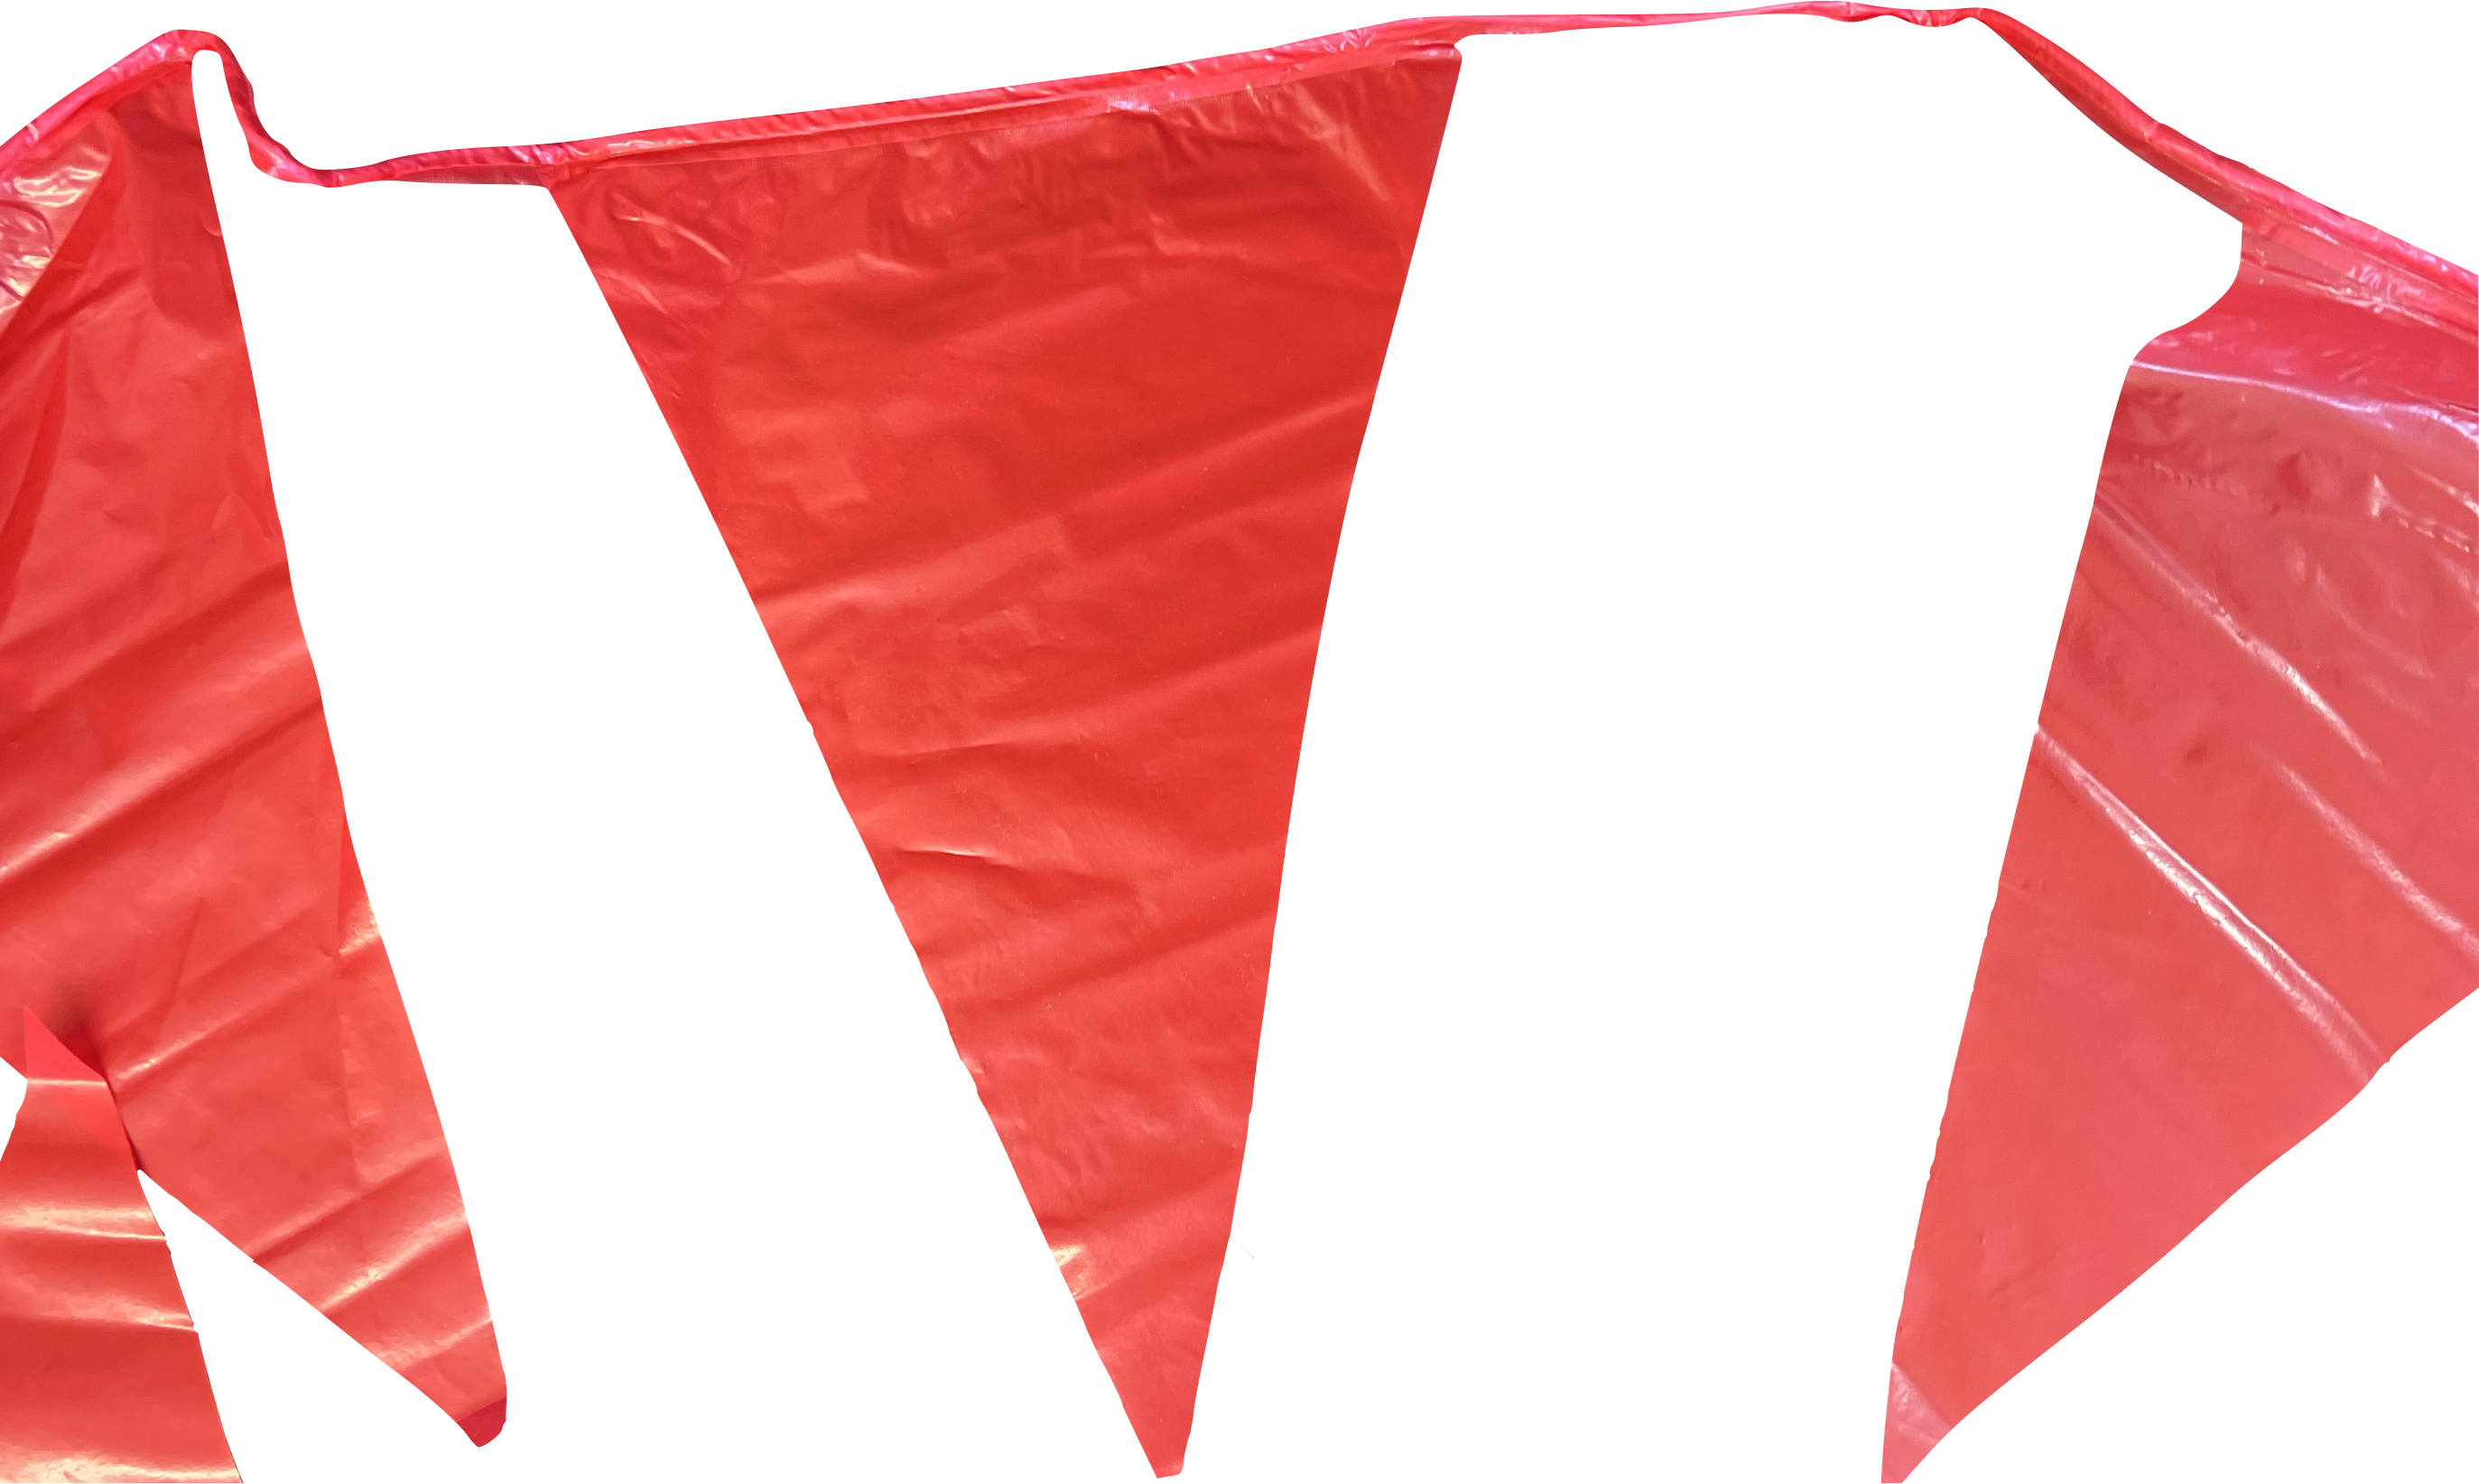 Mutual Industries 15903-79 OSHA Compliant Safety Perimeter Marker 105 ft Length + Red Pennant Flags